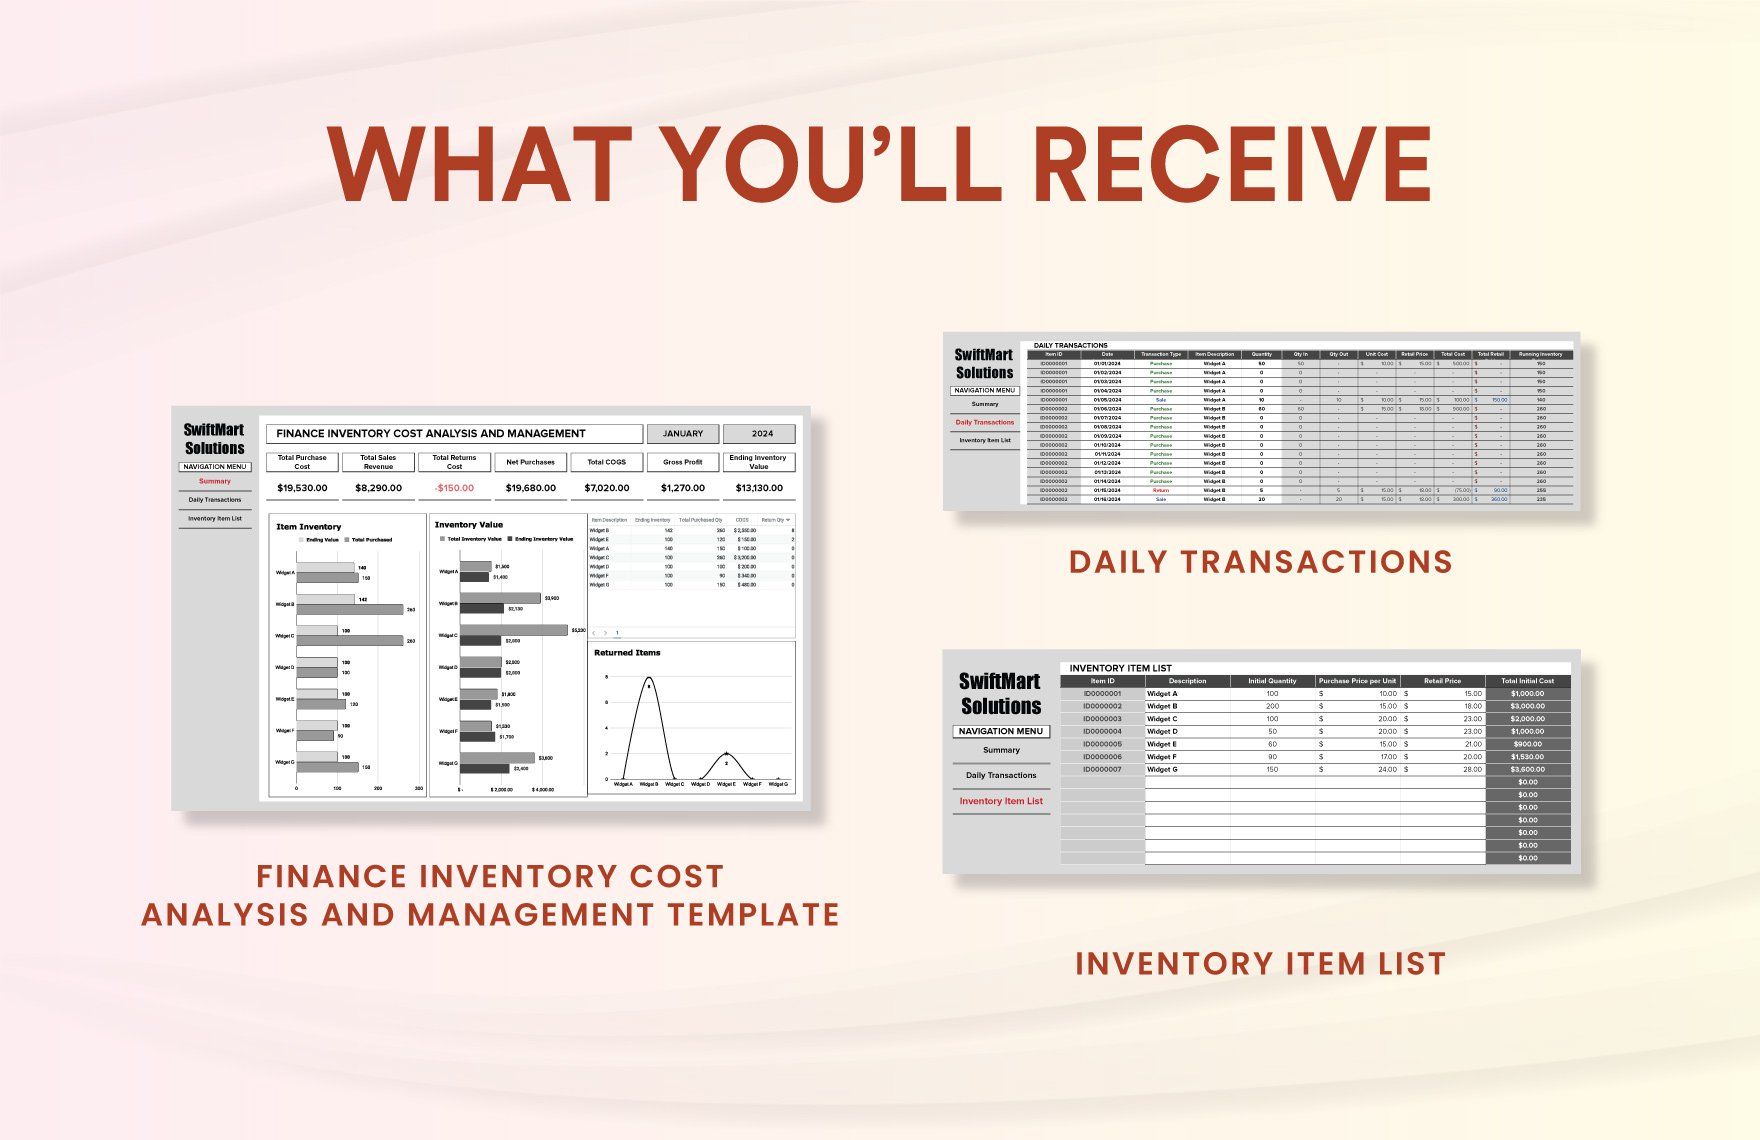 Finance Inventory Cost Analysis and Management Template